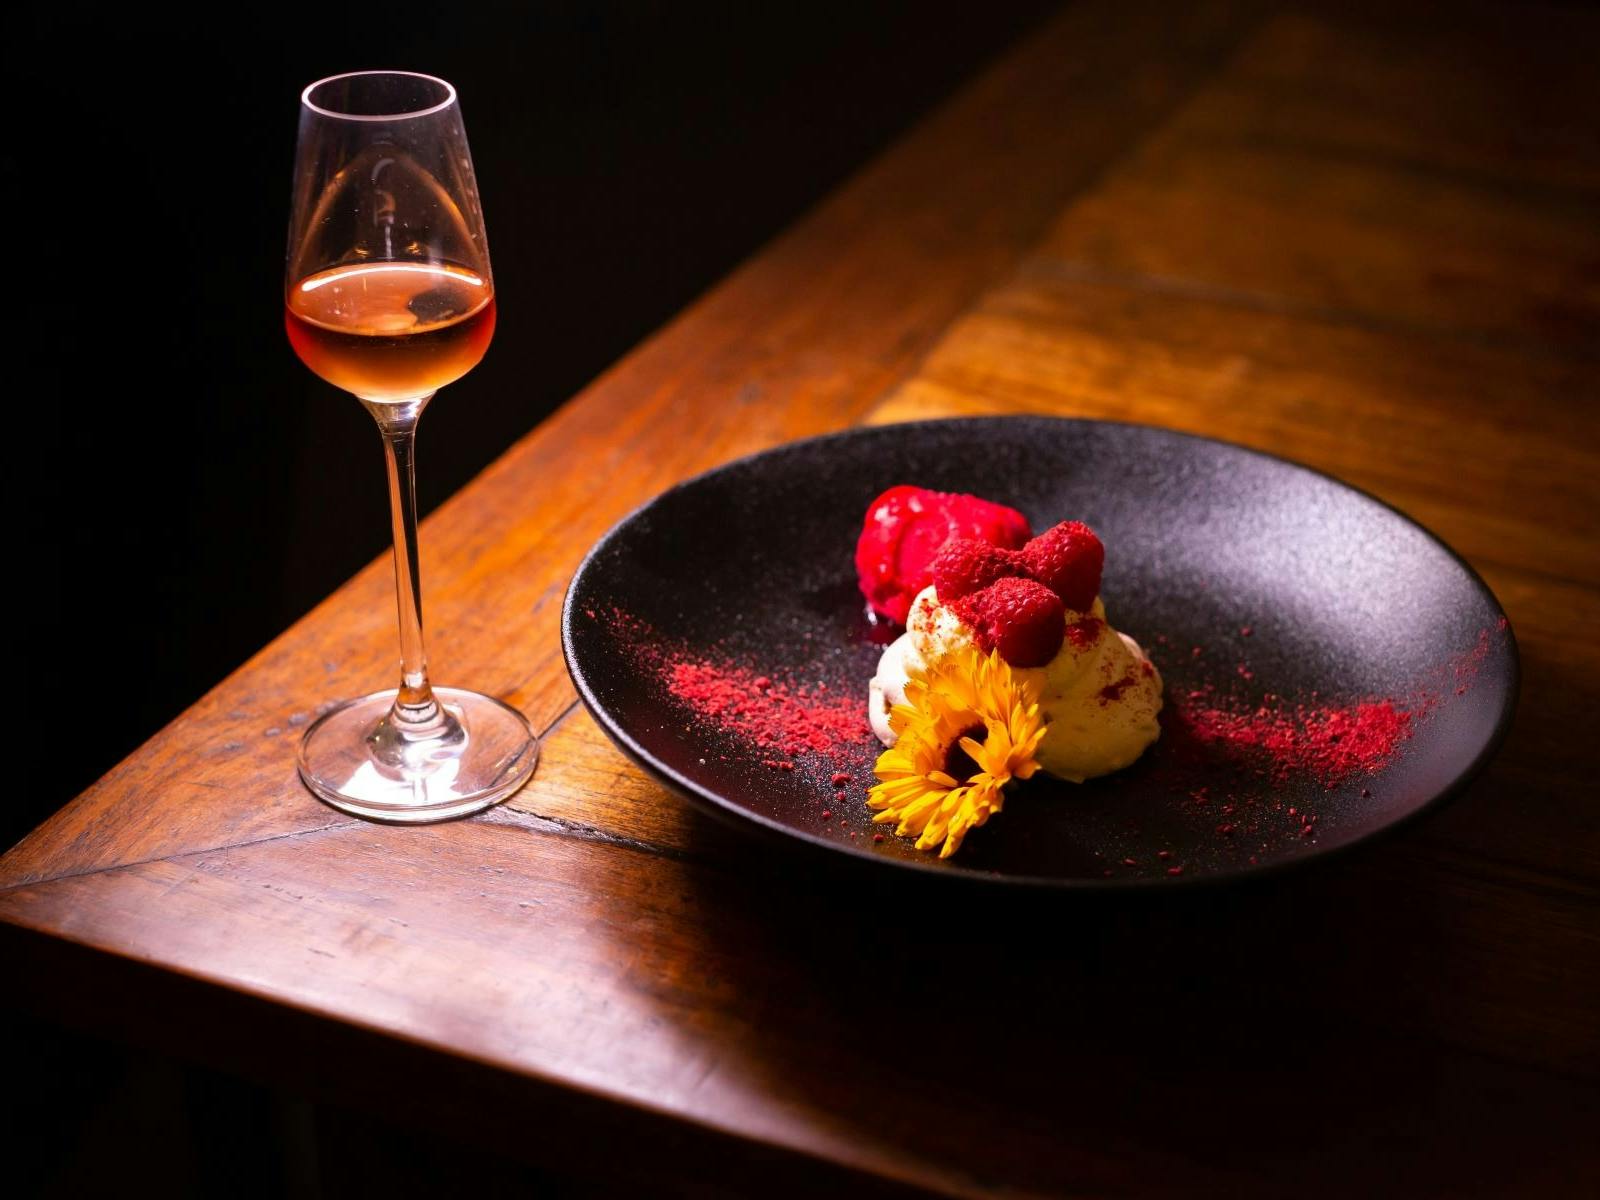 Wooden table with dessert wine glass and plated dessert with a flower